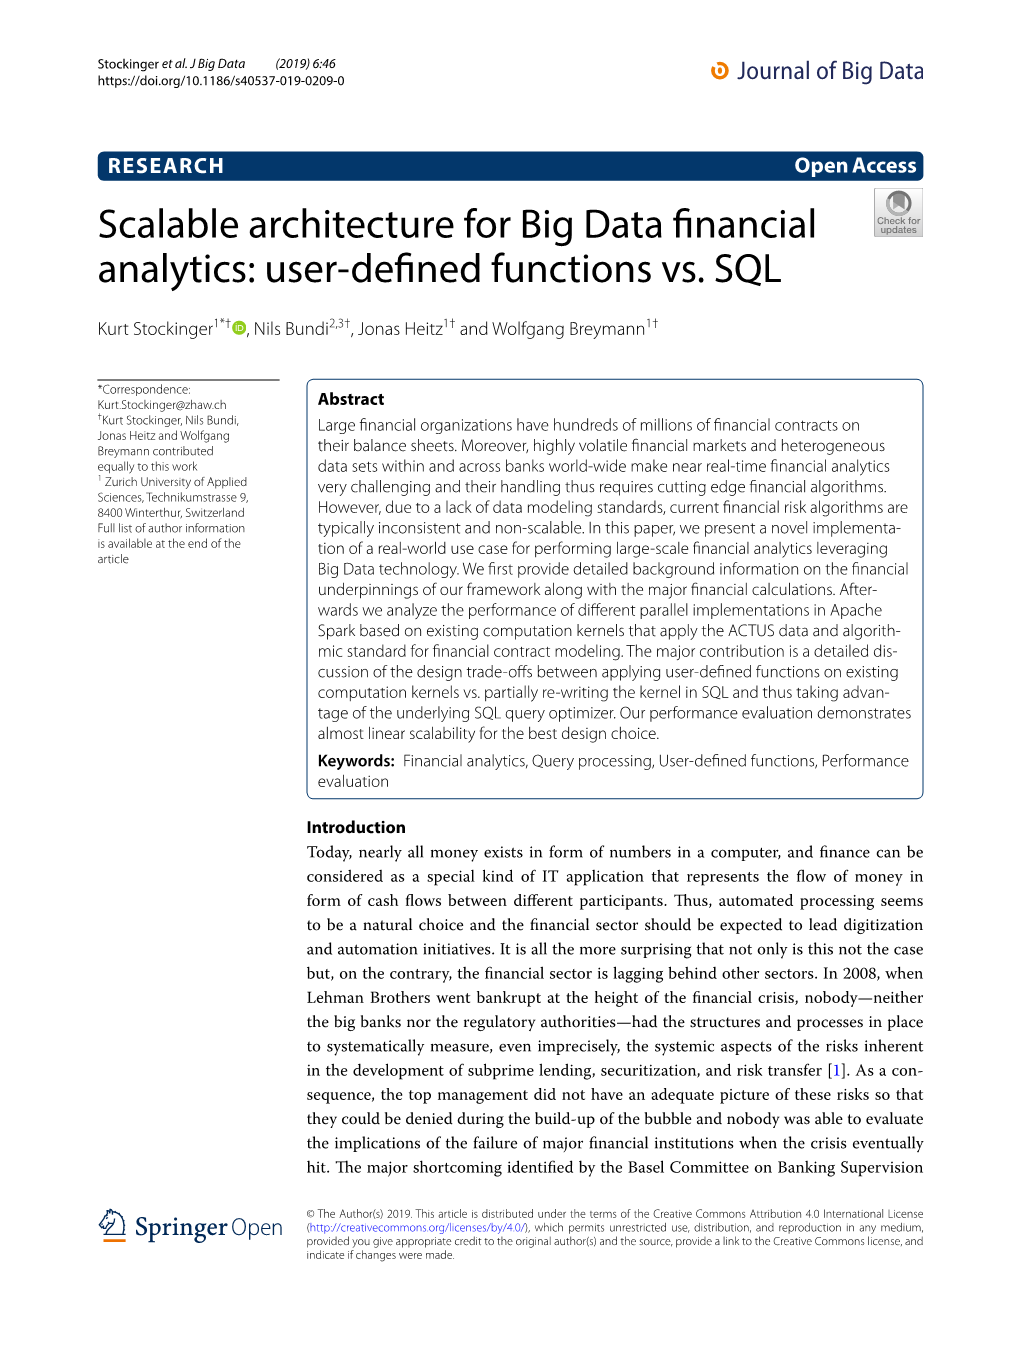 Scalable Architecture for Big Data Financial Analytics: User-Defined